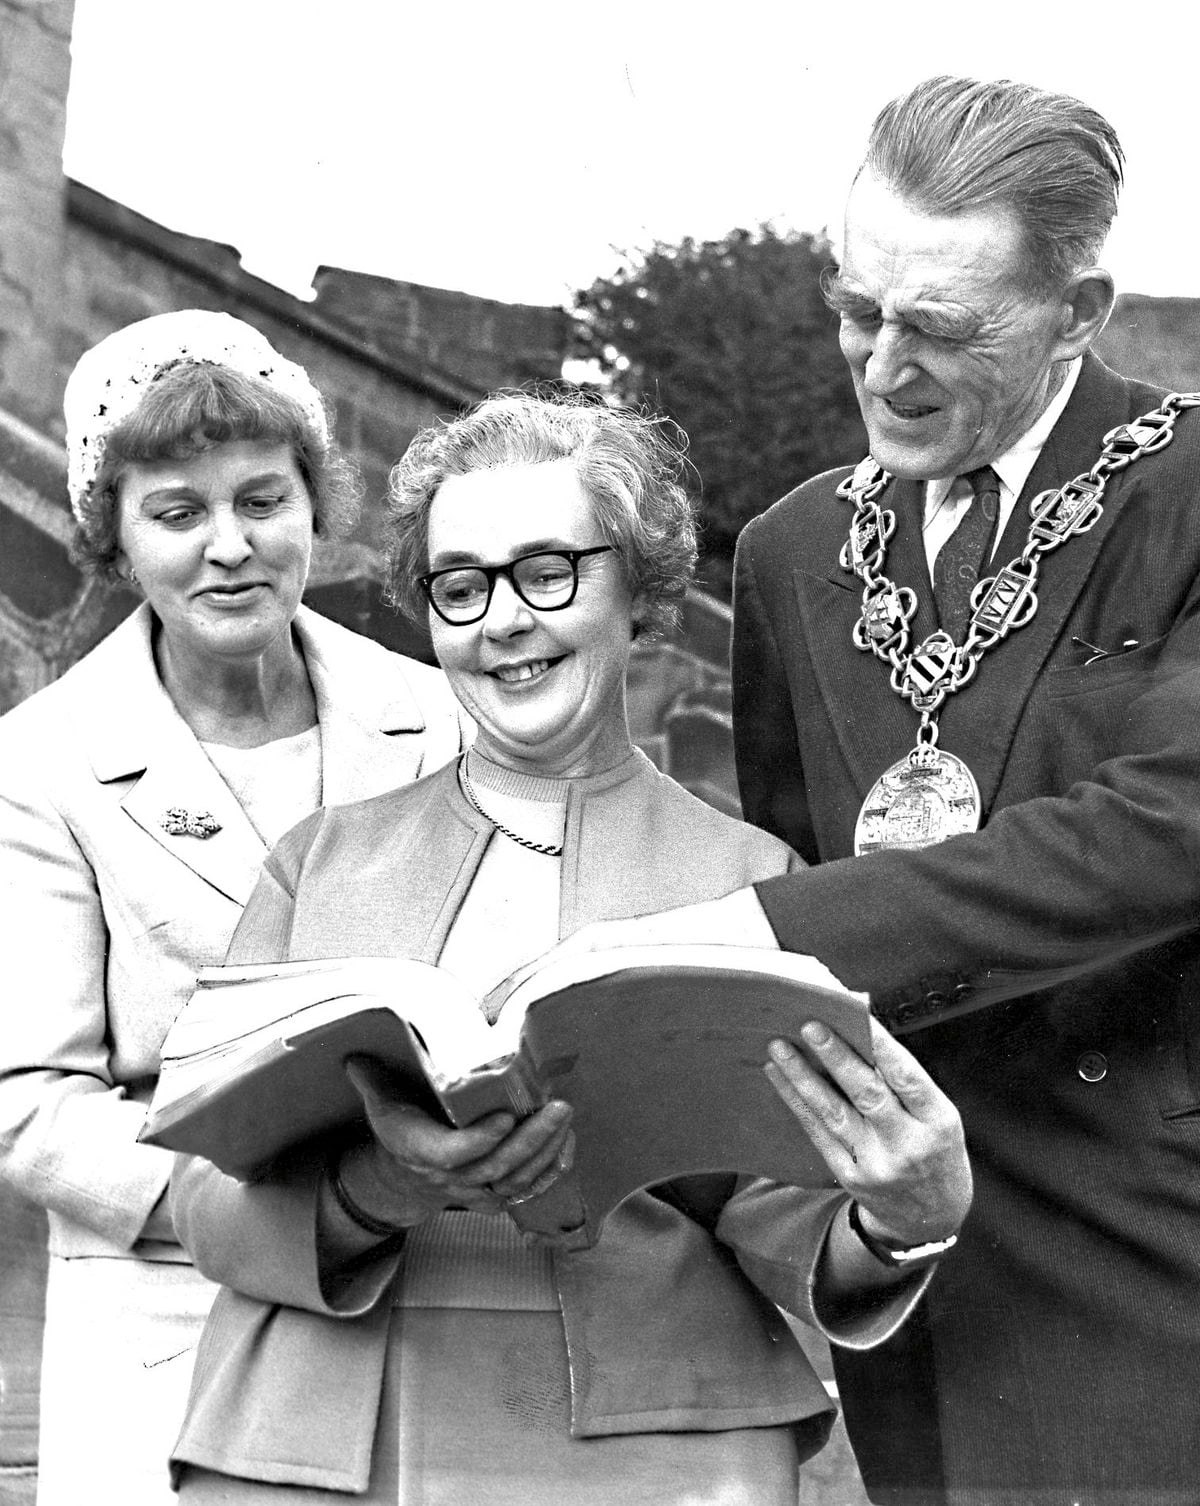 Edith, centre, at Shrewsbury Castle in 1961, with the manuscript of her latest book, The Heaven Tree, a 13th century historical novel in which the castle figured.